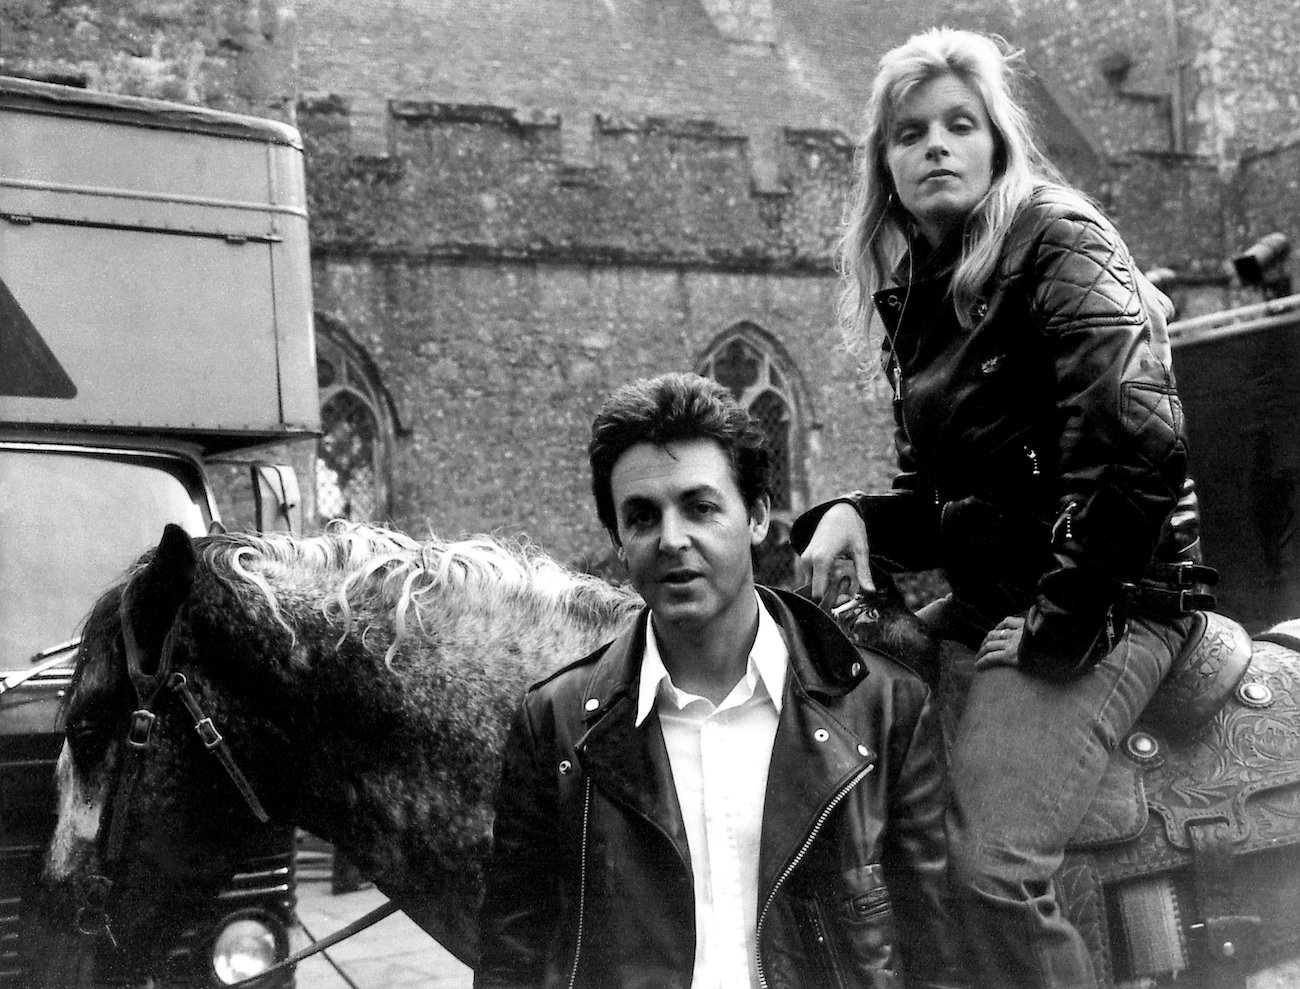 Paul McCartney and his wife, Linda, at Lympne Castle in 1979.